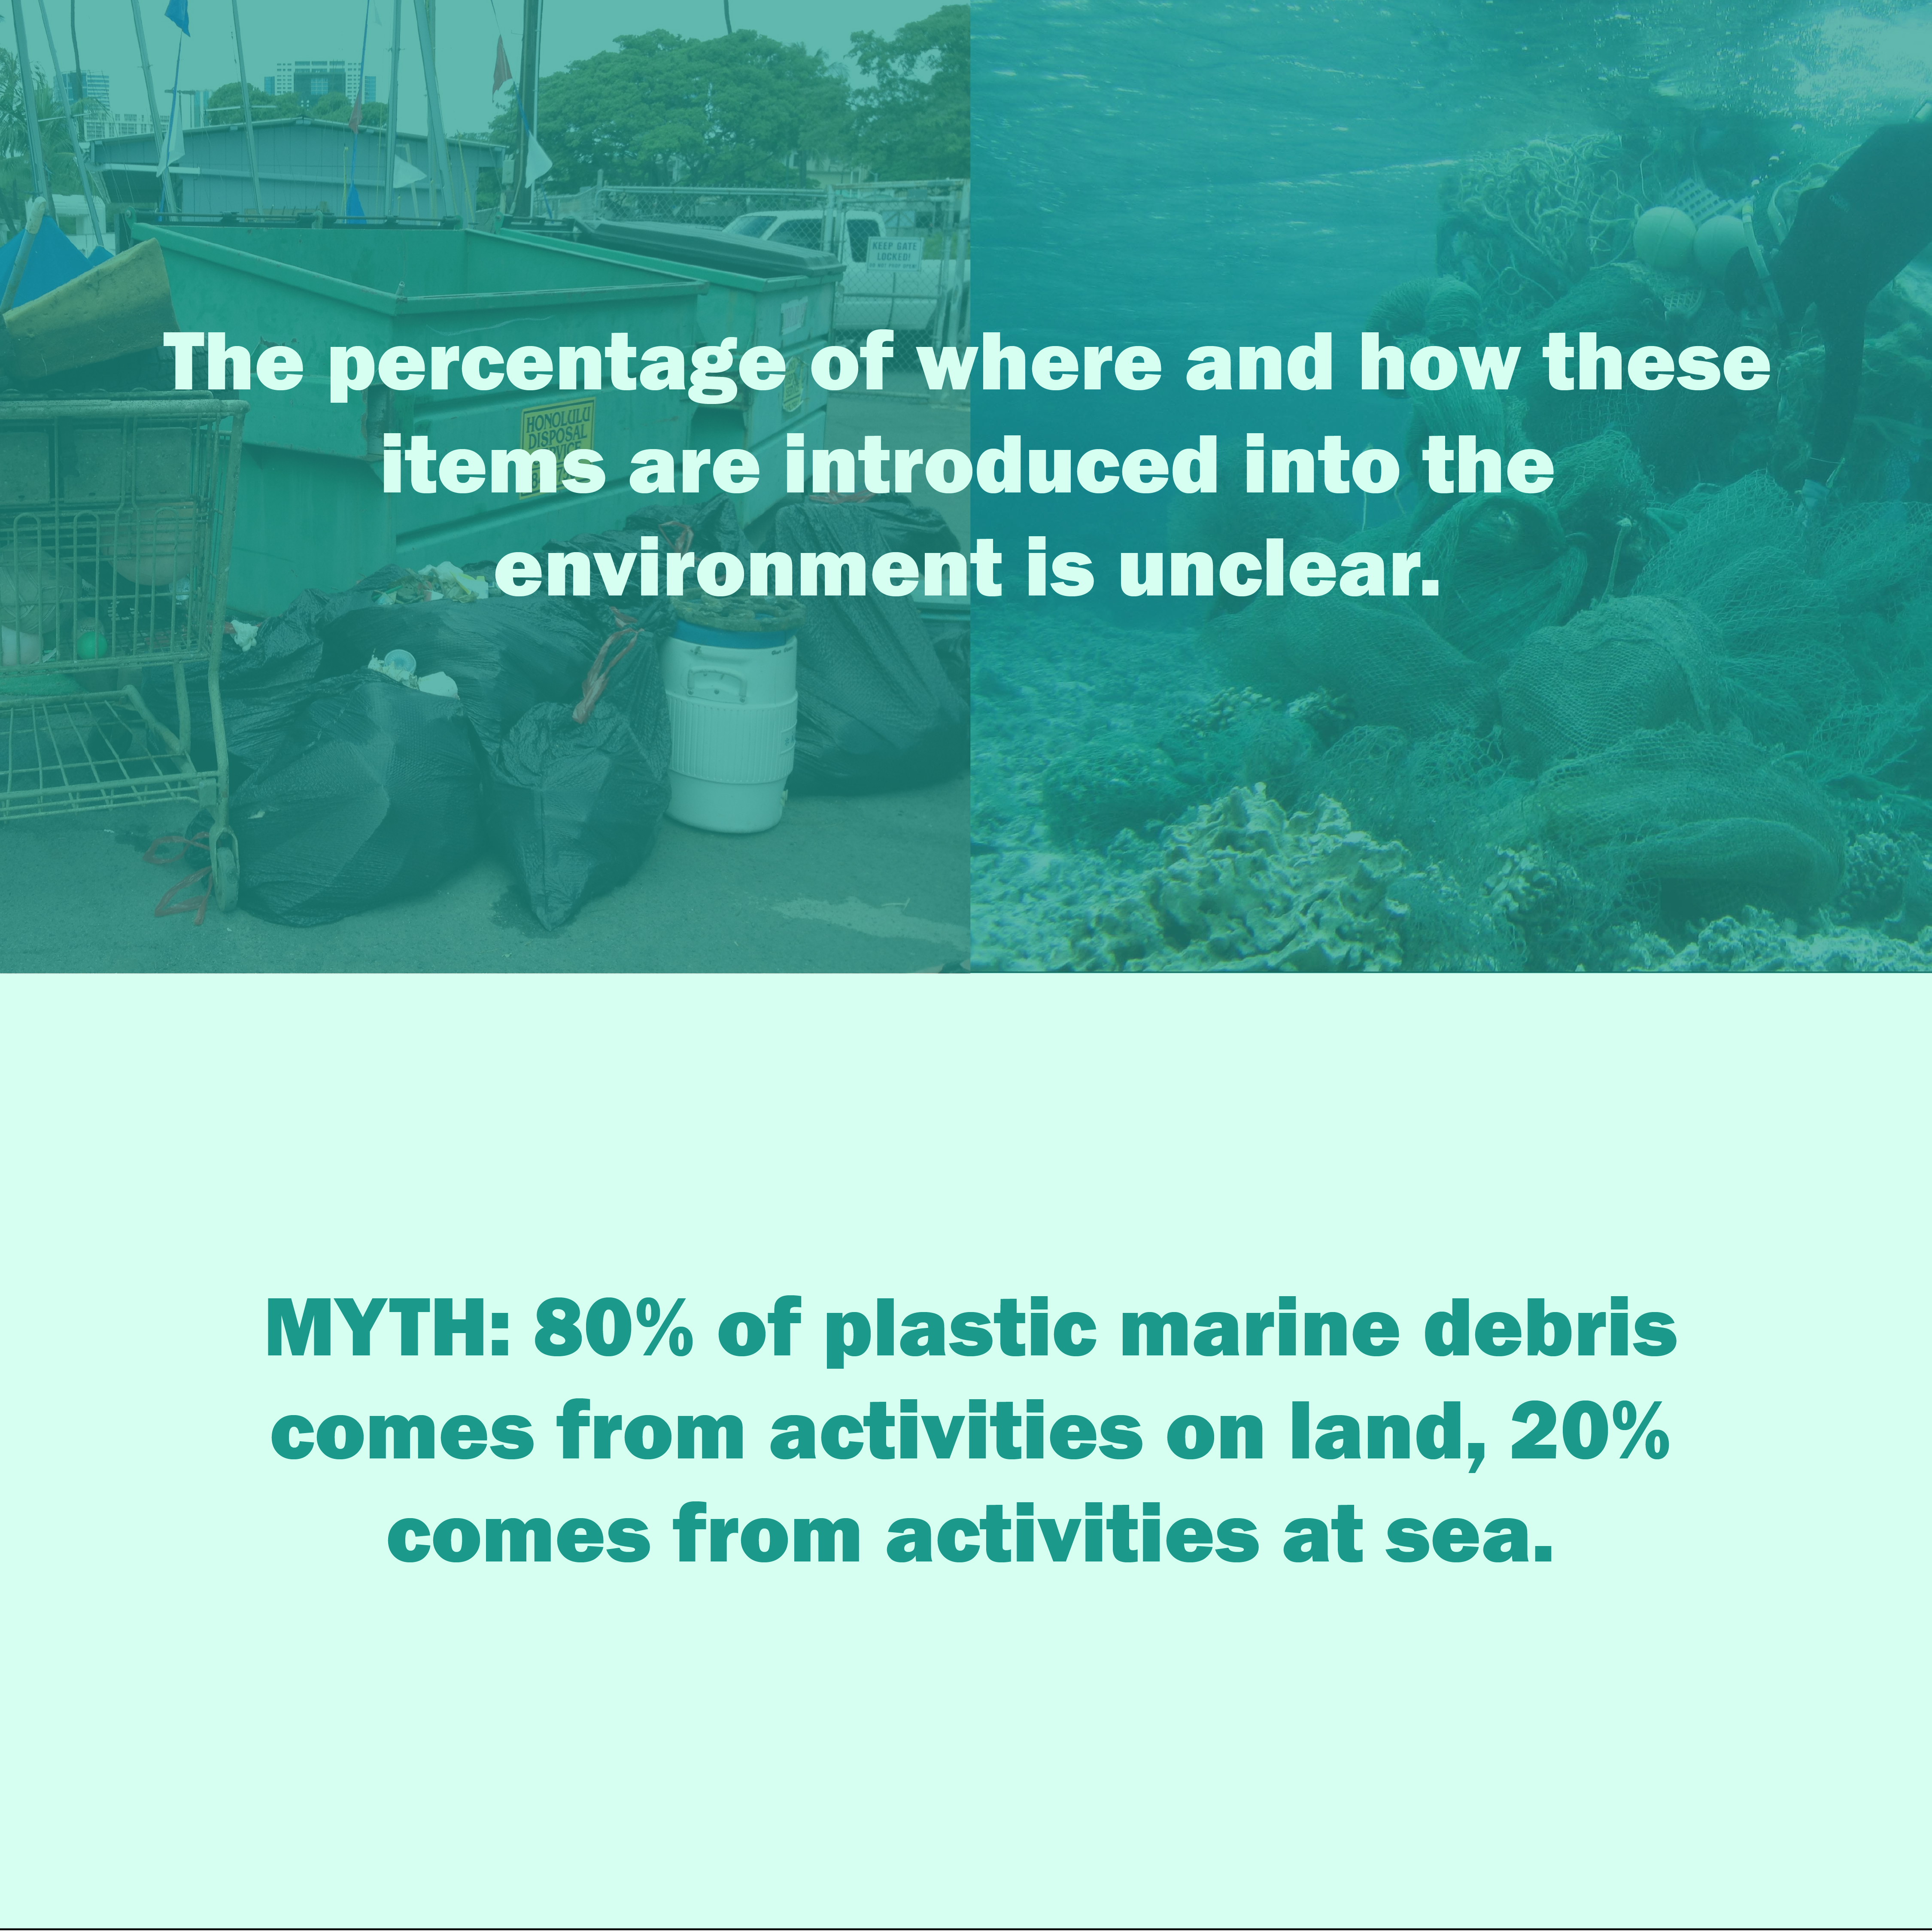 An infographic that explains how marine debris is introduced into the environment.